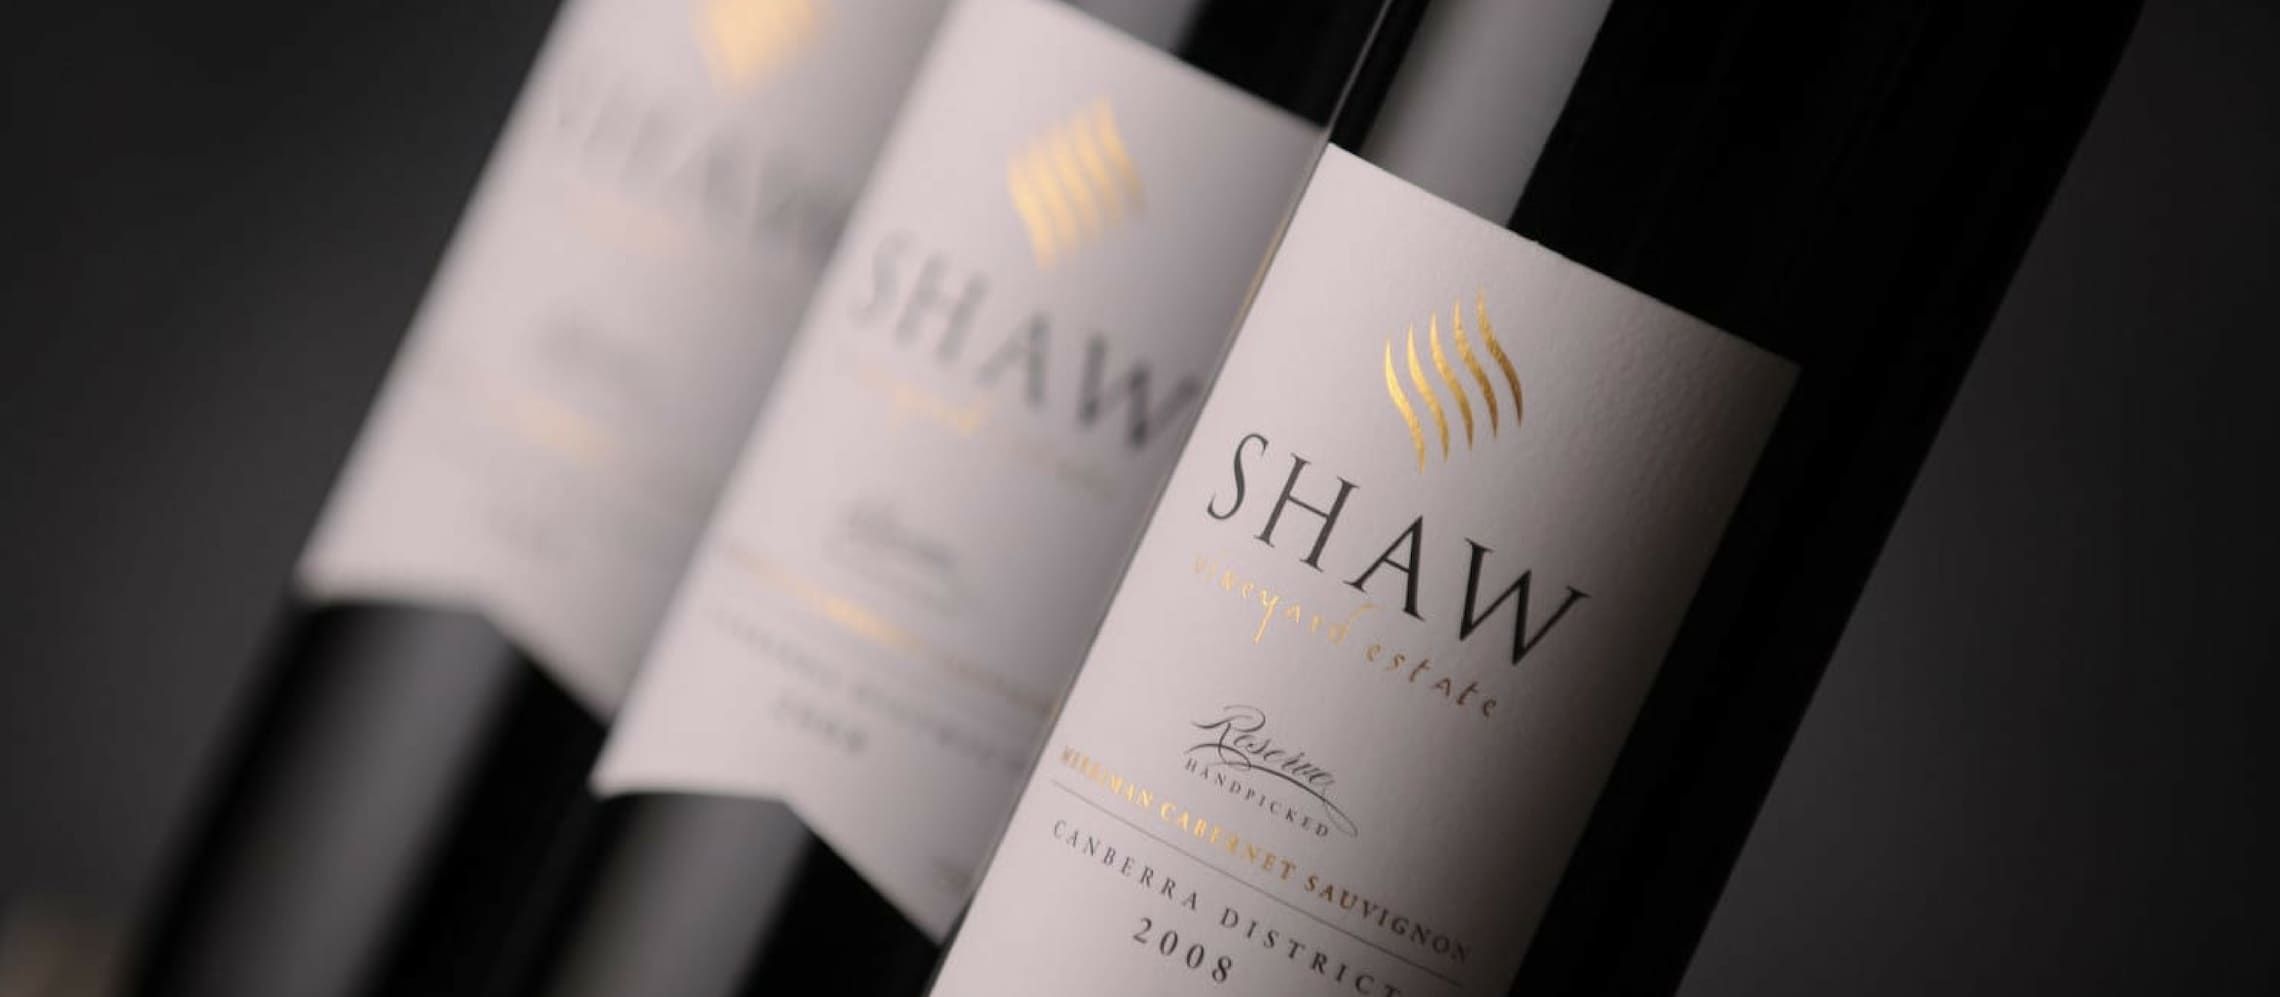 Photo for: Shaw Vineyard Estate wins Five Awards at a Wine Competition